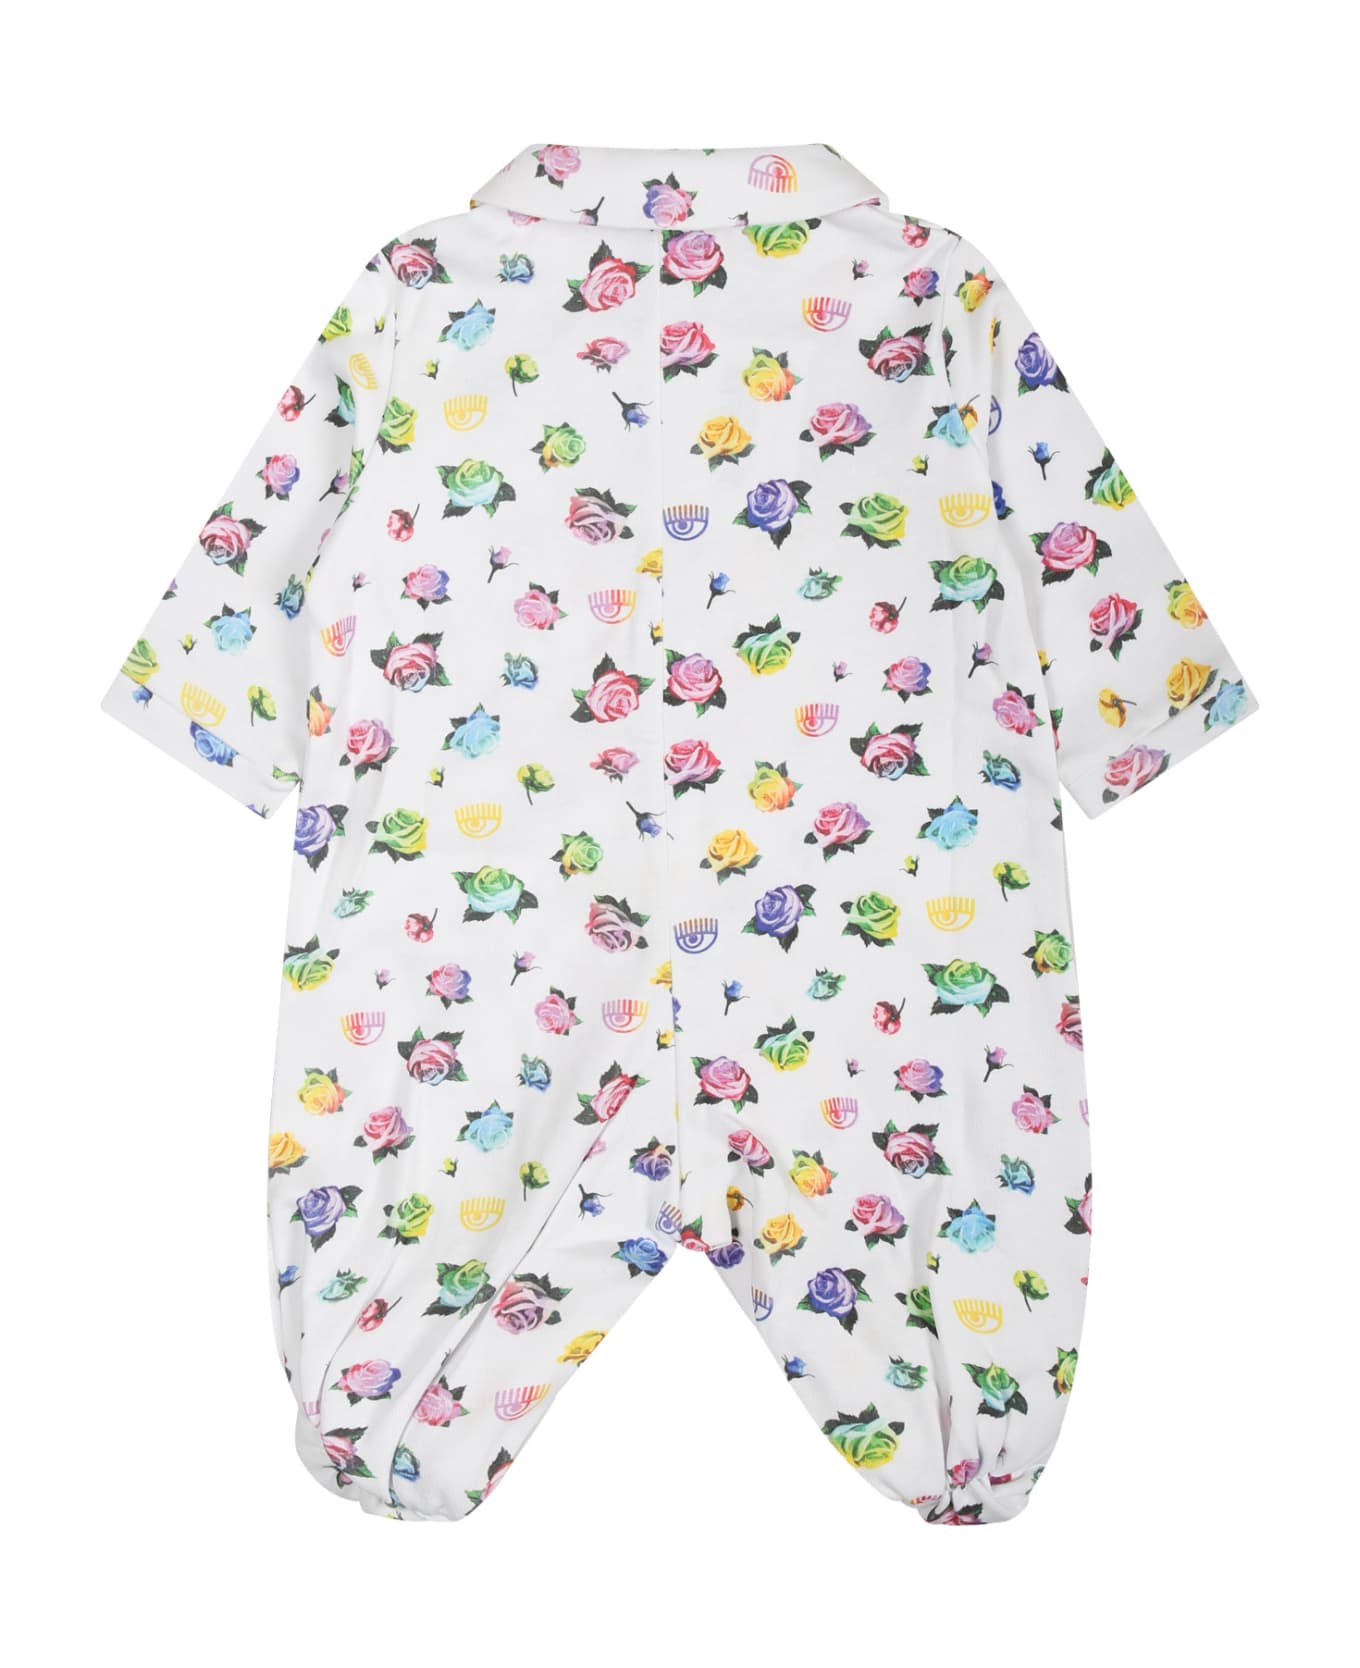 Chiara Ferragni Pink Playsuit For Baby Girl With Flirting Eyes And Multicolor Roses - White